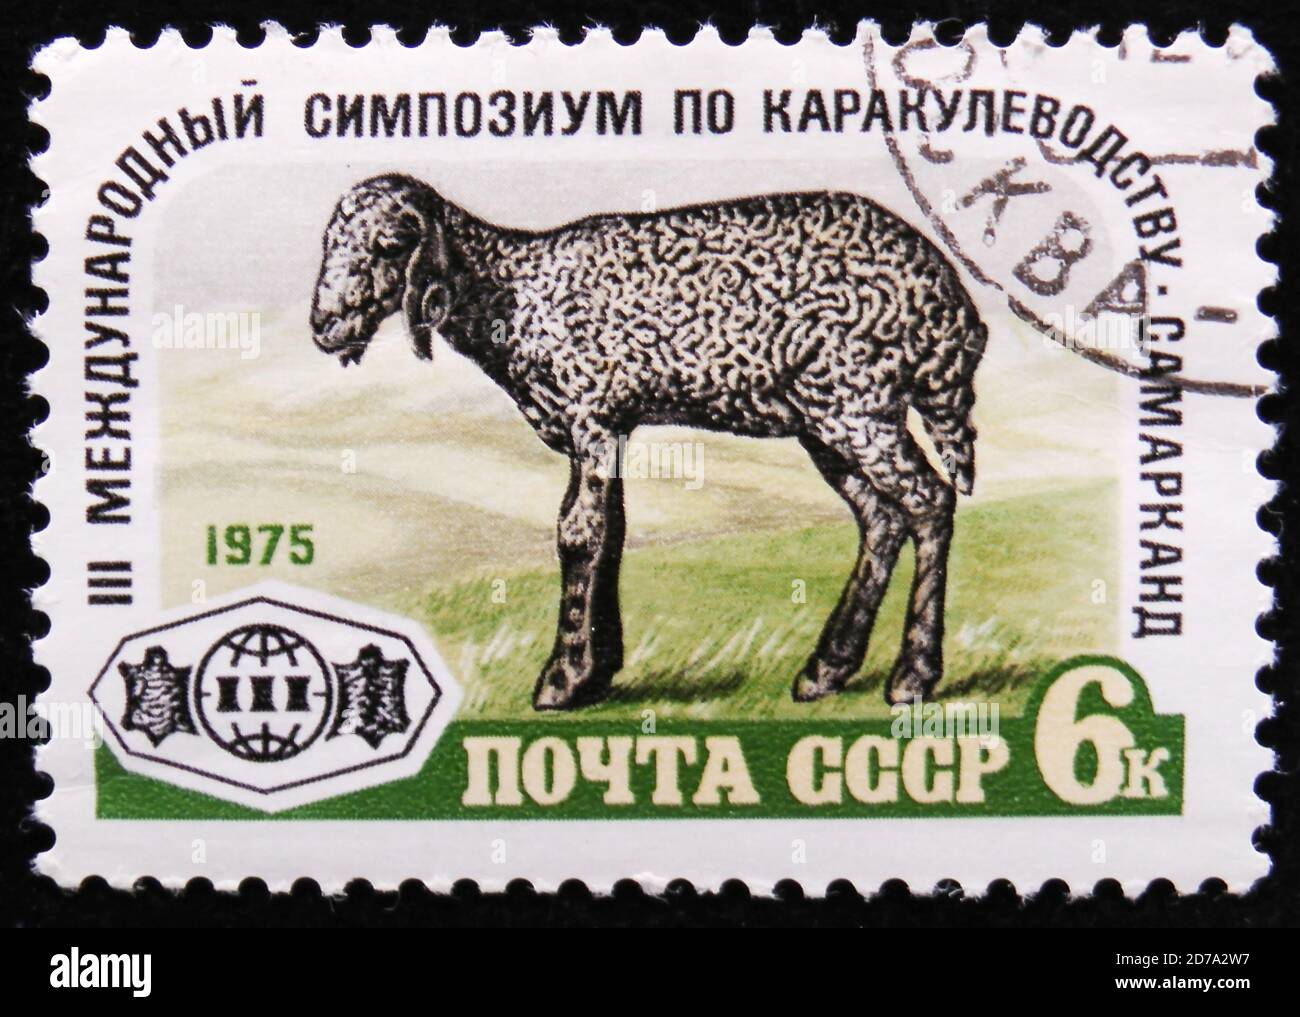 MOSCOW, RUSSIA - APRIL 2, 2017: A post stamp printed in USSR shows image of a Karakul Lamb and devoted to 3rd International Symposium on karakul produ Stock Photo